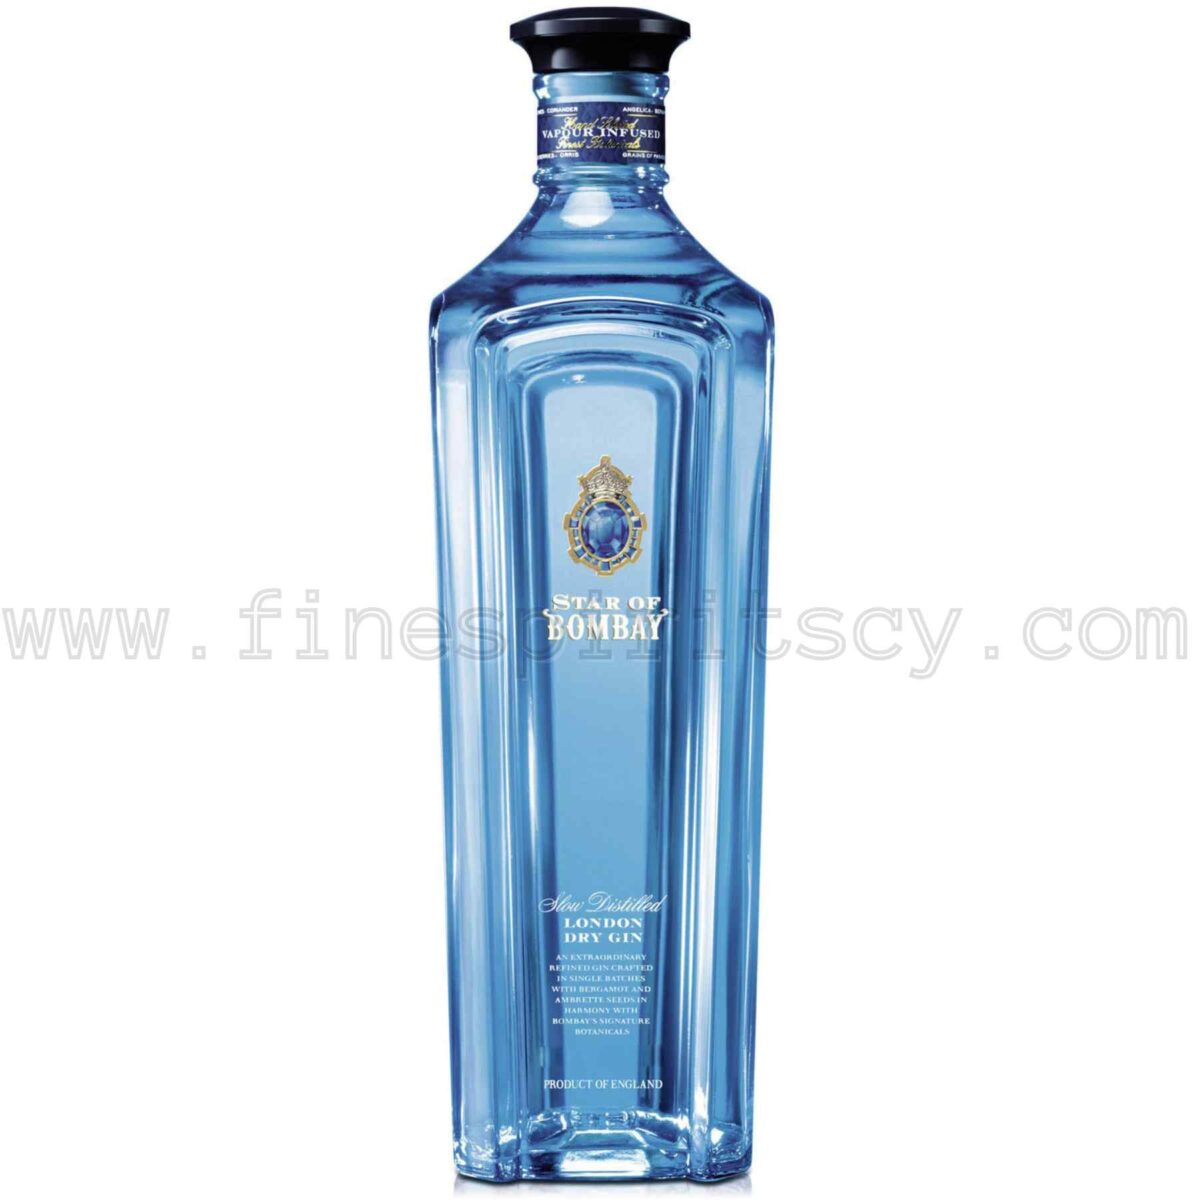 Star Of Bombay Slow Distilled London Dry Gin